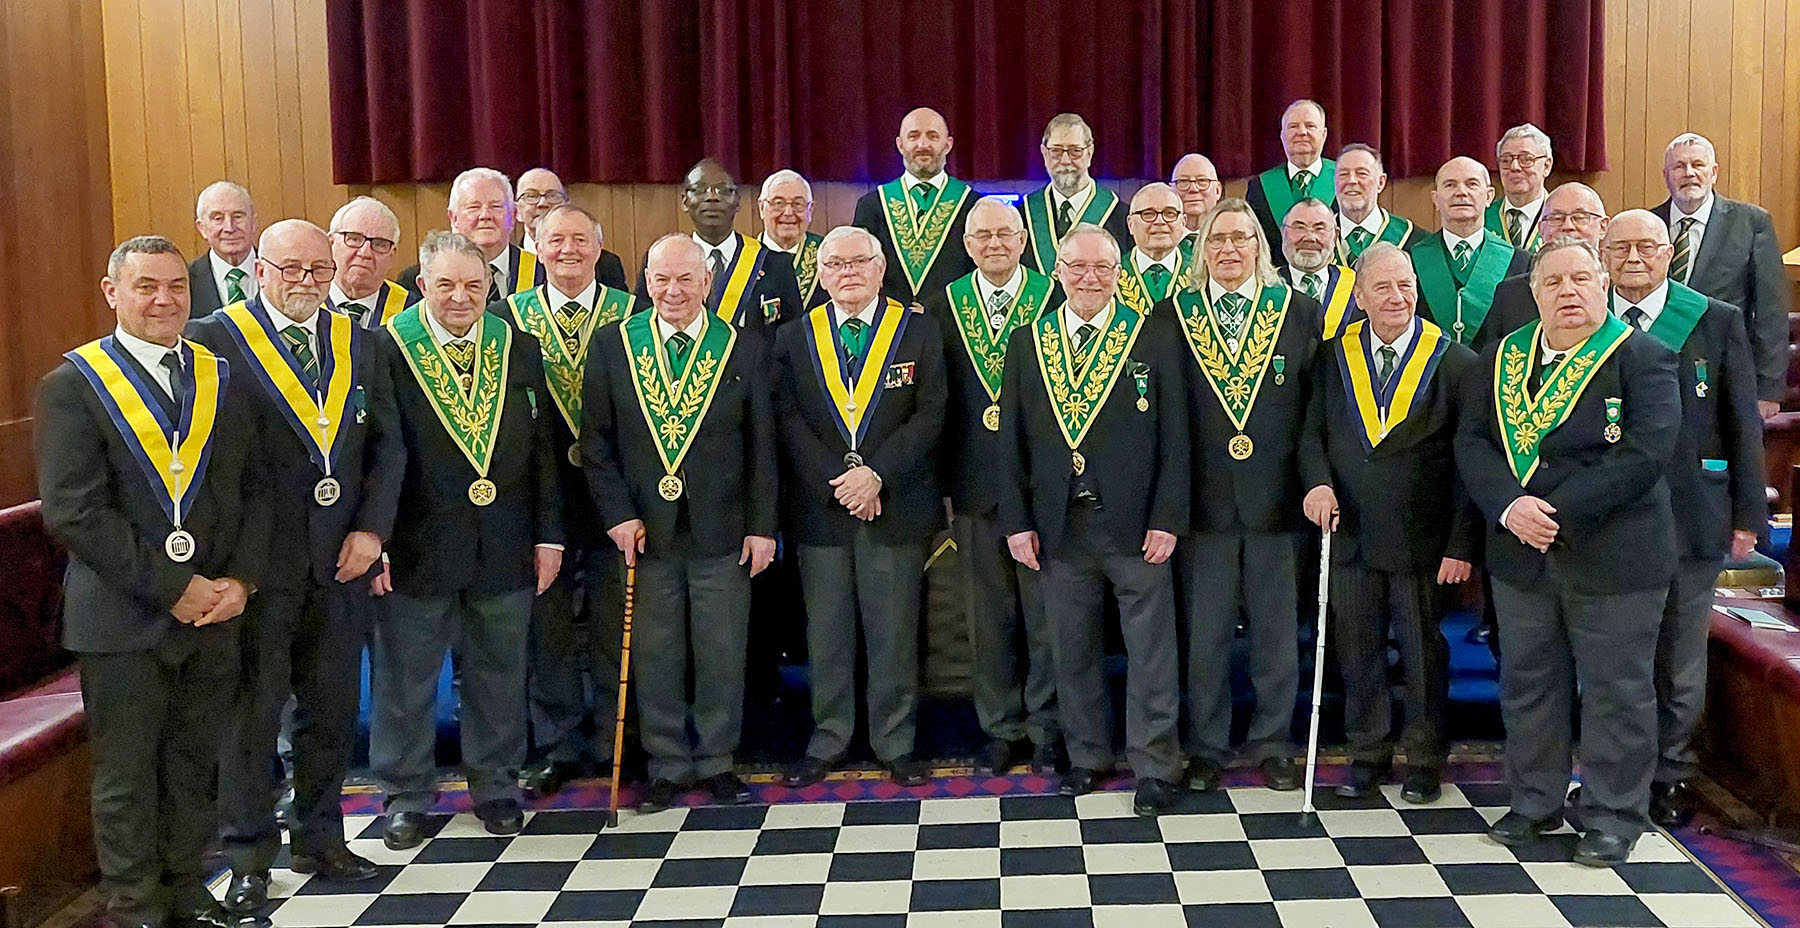 Brethren of the White Cliffs of Dover Council with the District Escort and the Visitors